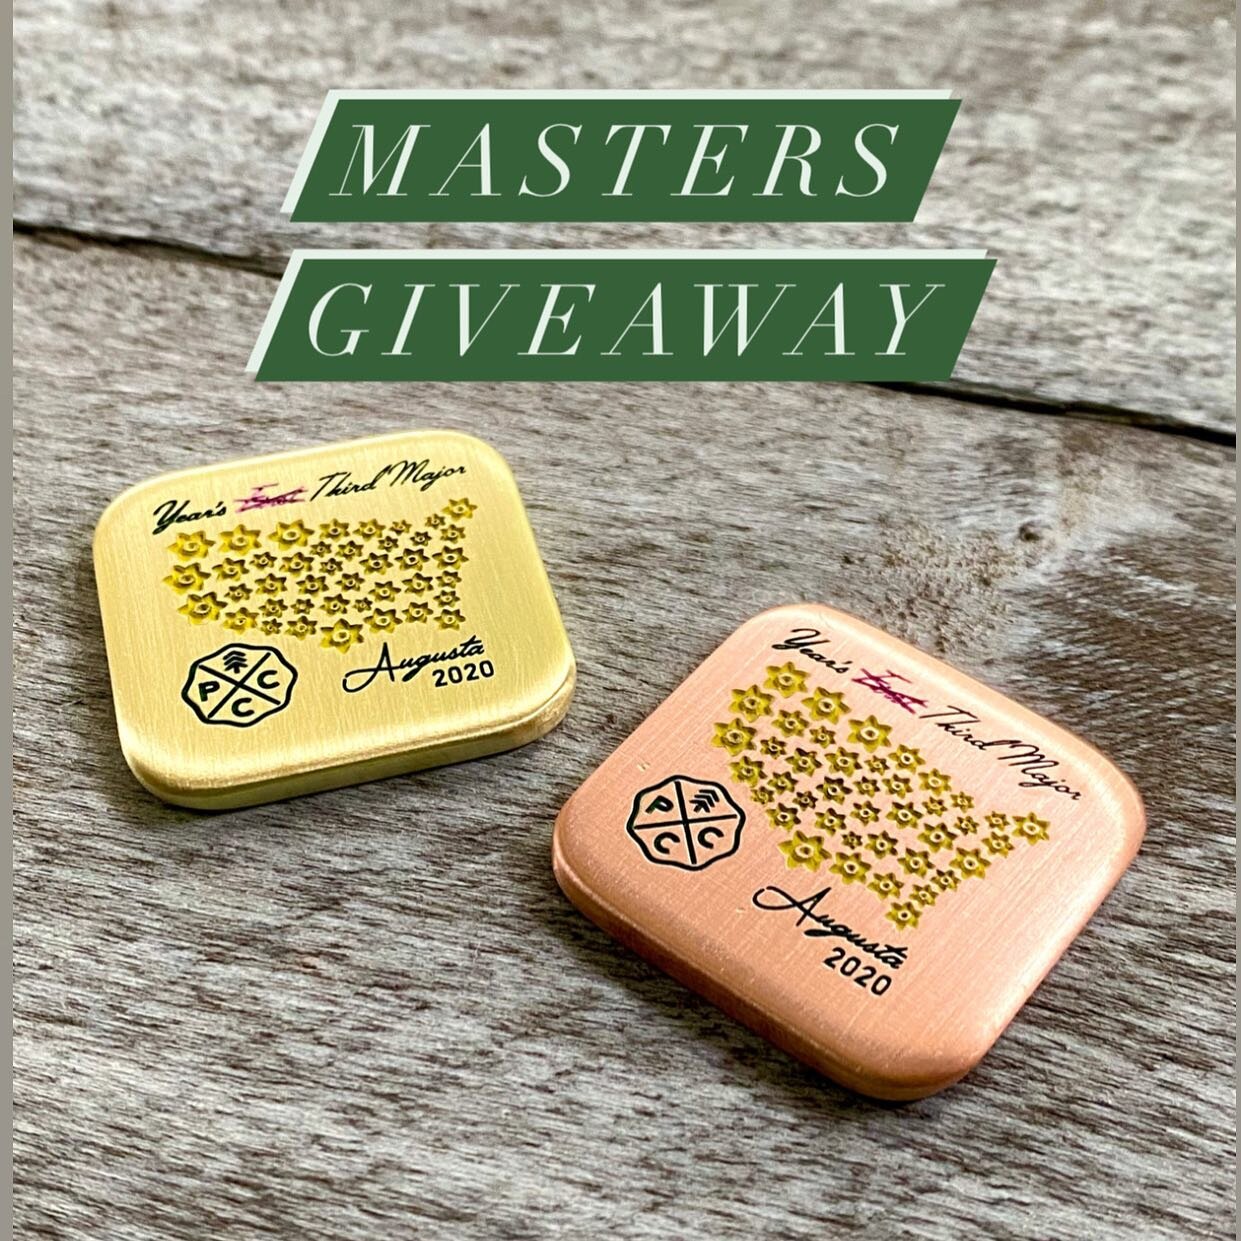 This year&rsquo;s Masters is officially underway! We&rsquo;re giving away two 2020 Masters Ball Markers. Enter during the tournament and we&rsquo;ll announce TWO winners on Sunday!

To enter:
🌺 Like this post 
🌺 Tag two friends in the comments belo